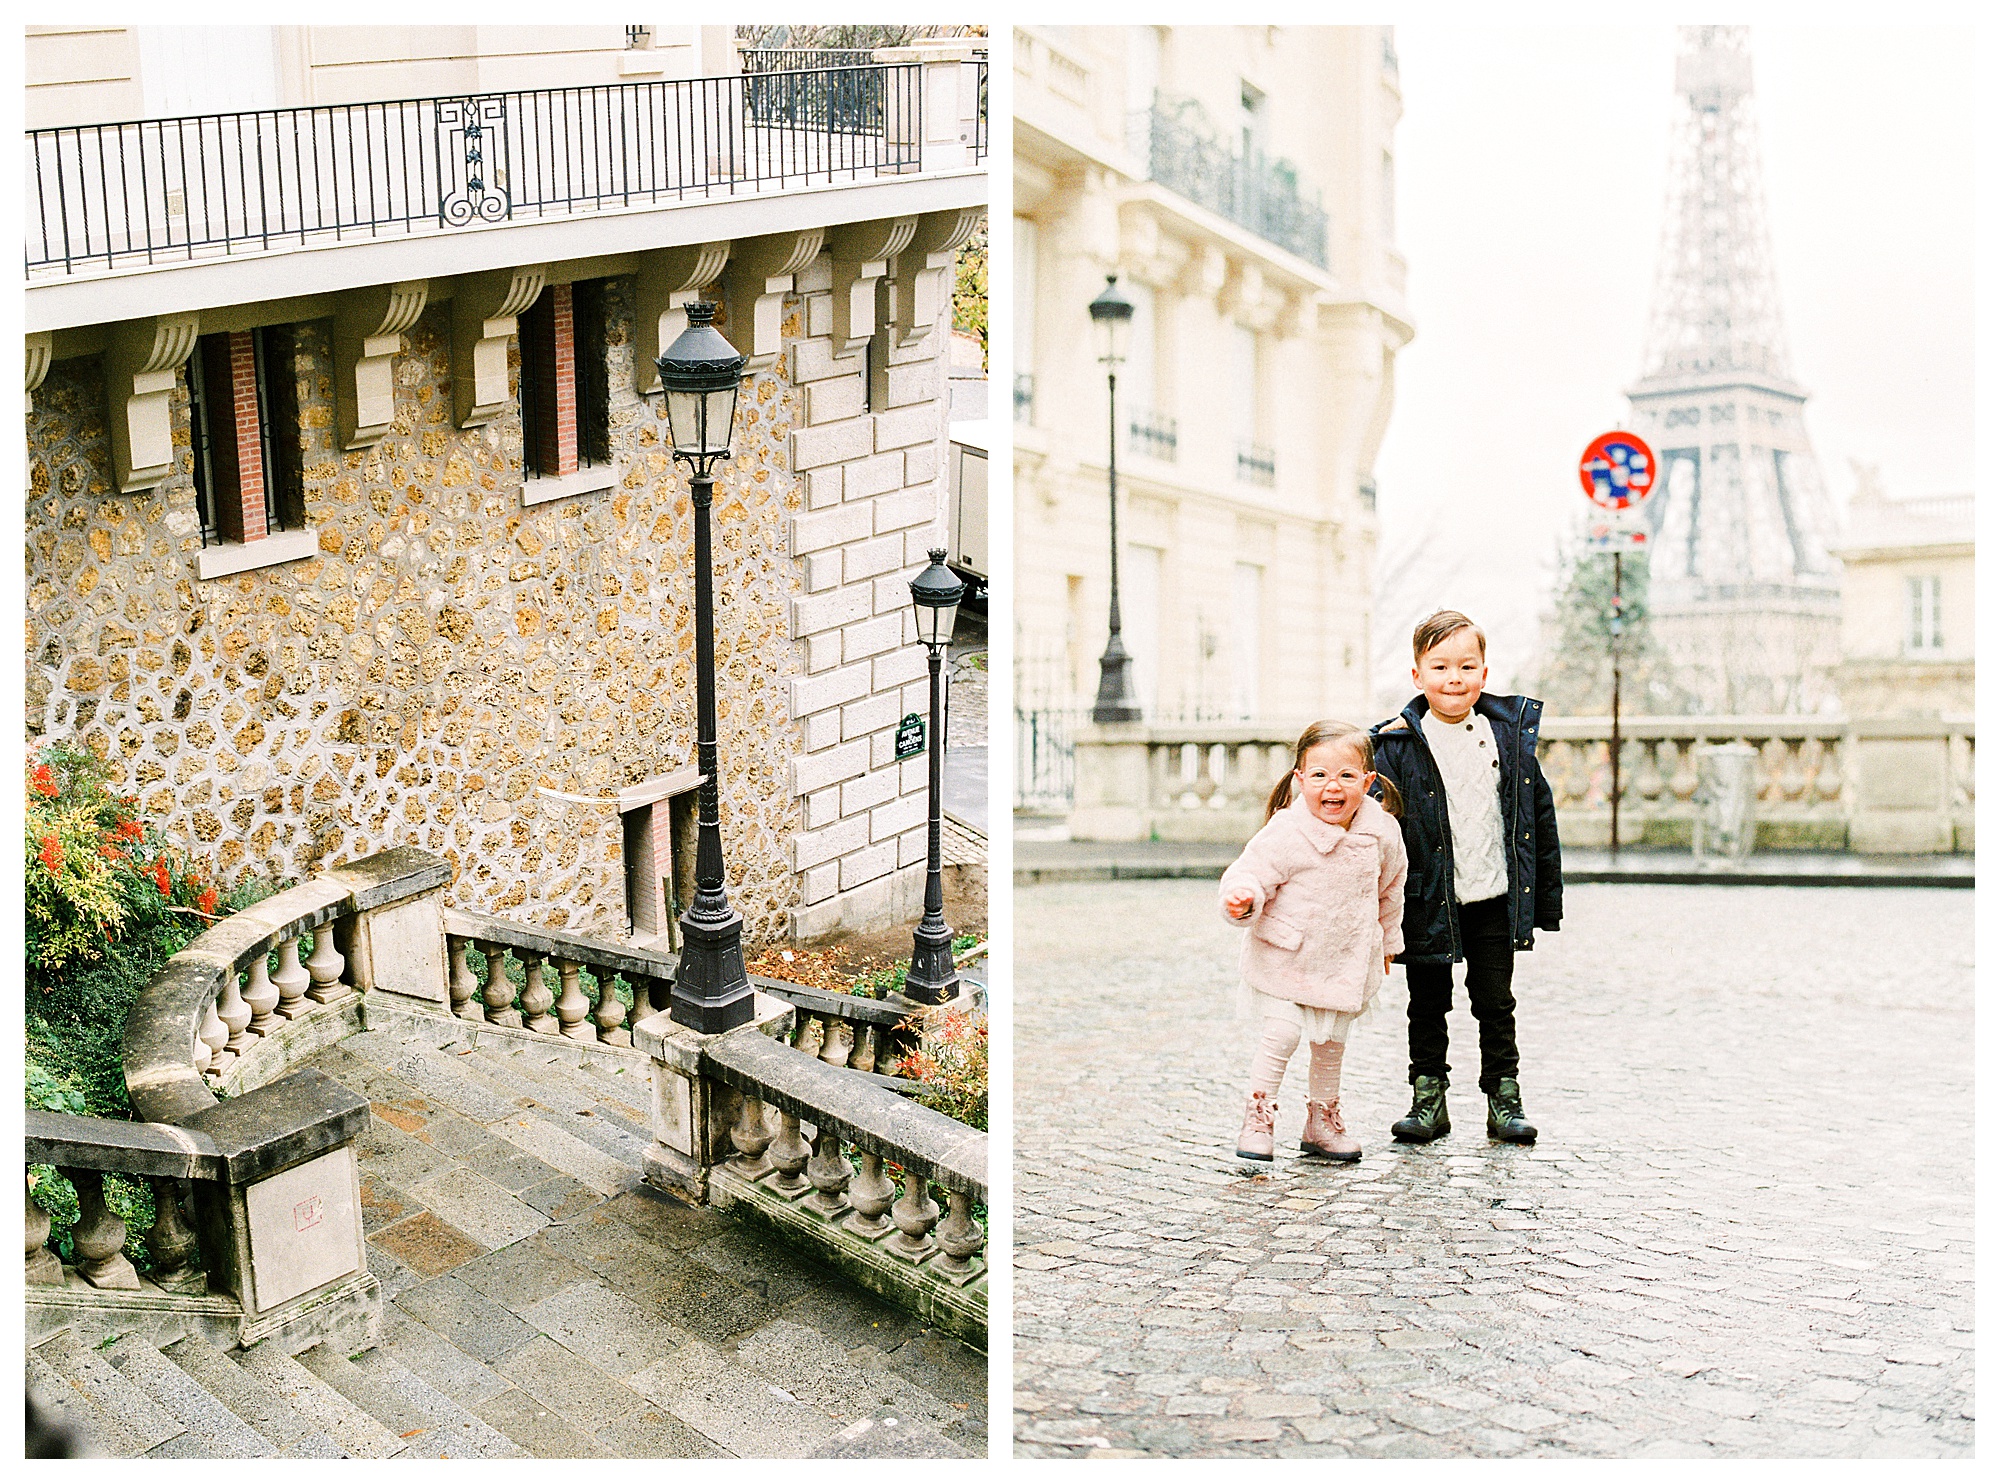 Two children standing in front of the Eiffel Tower